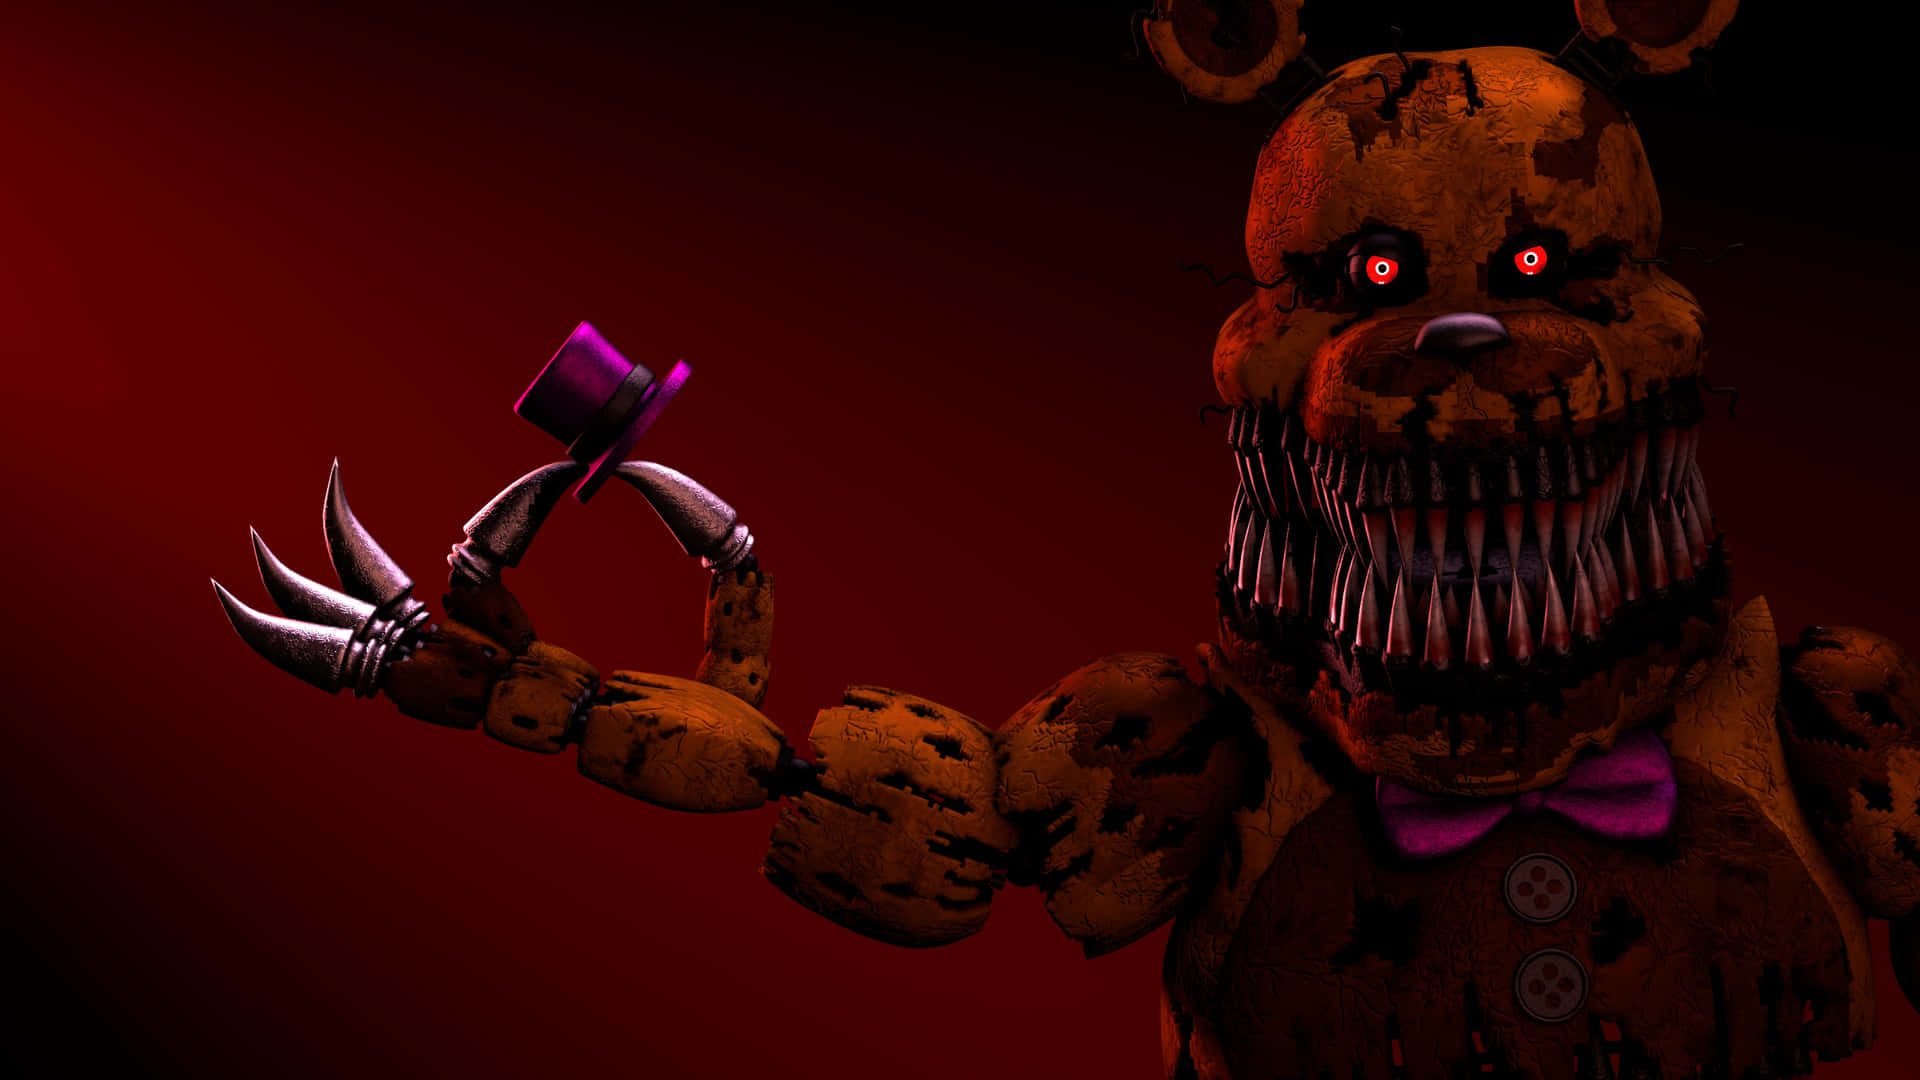 Five Nights At Freddy's 4 wallpapers for desktop, download free Five Nights  At Freddy's 4 pictures and backgrounds for PC